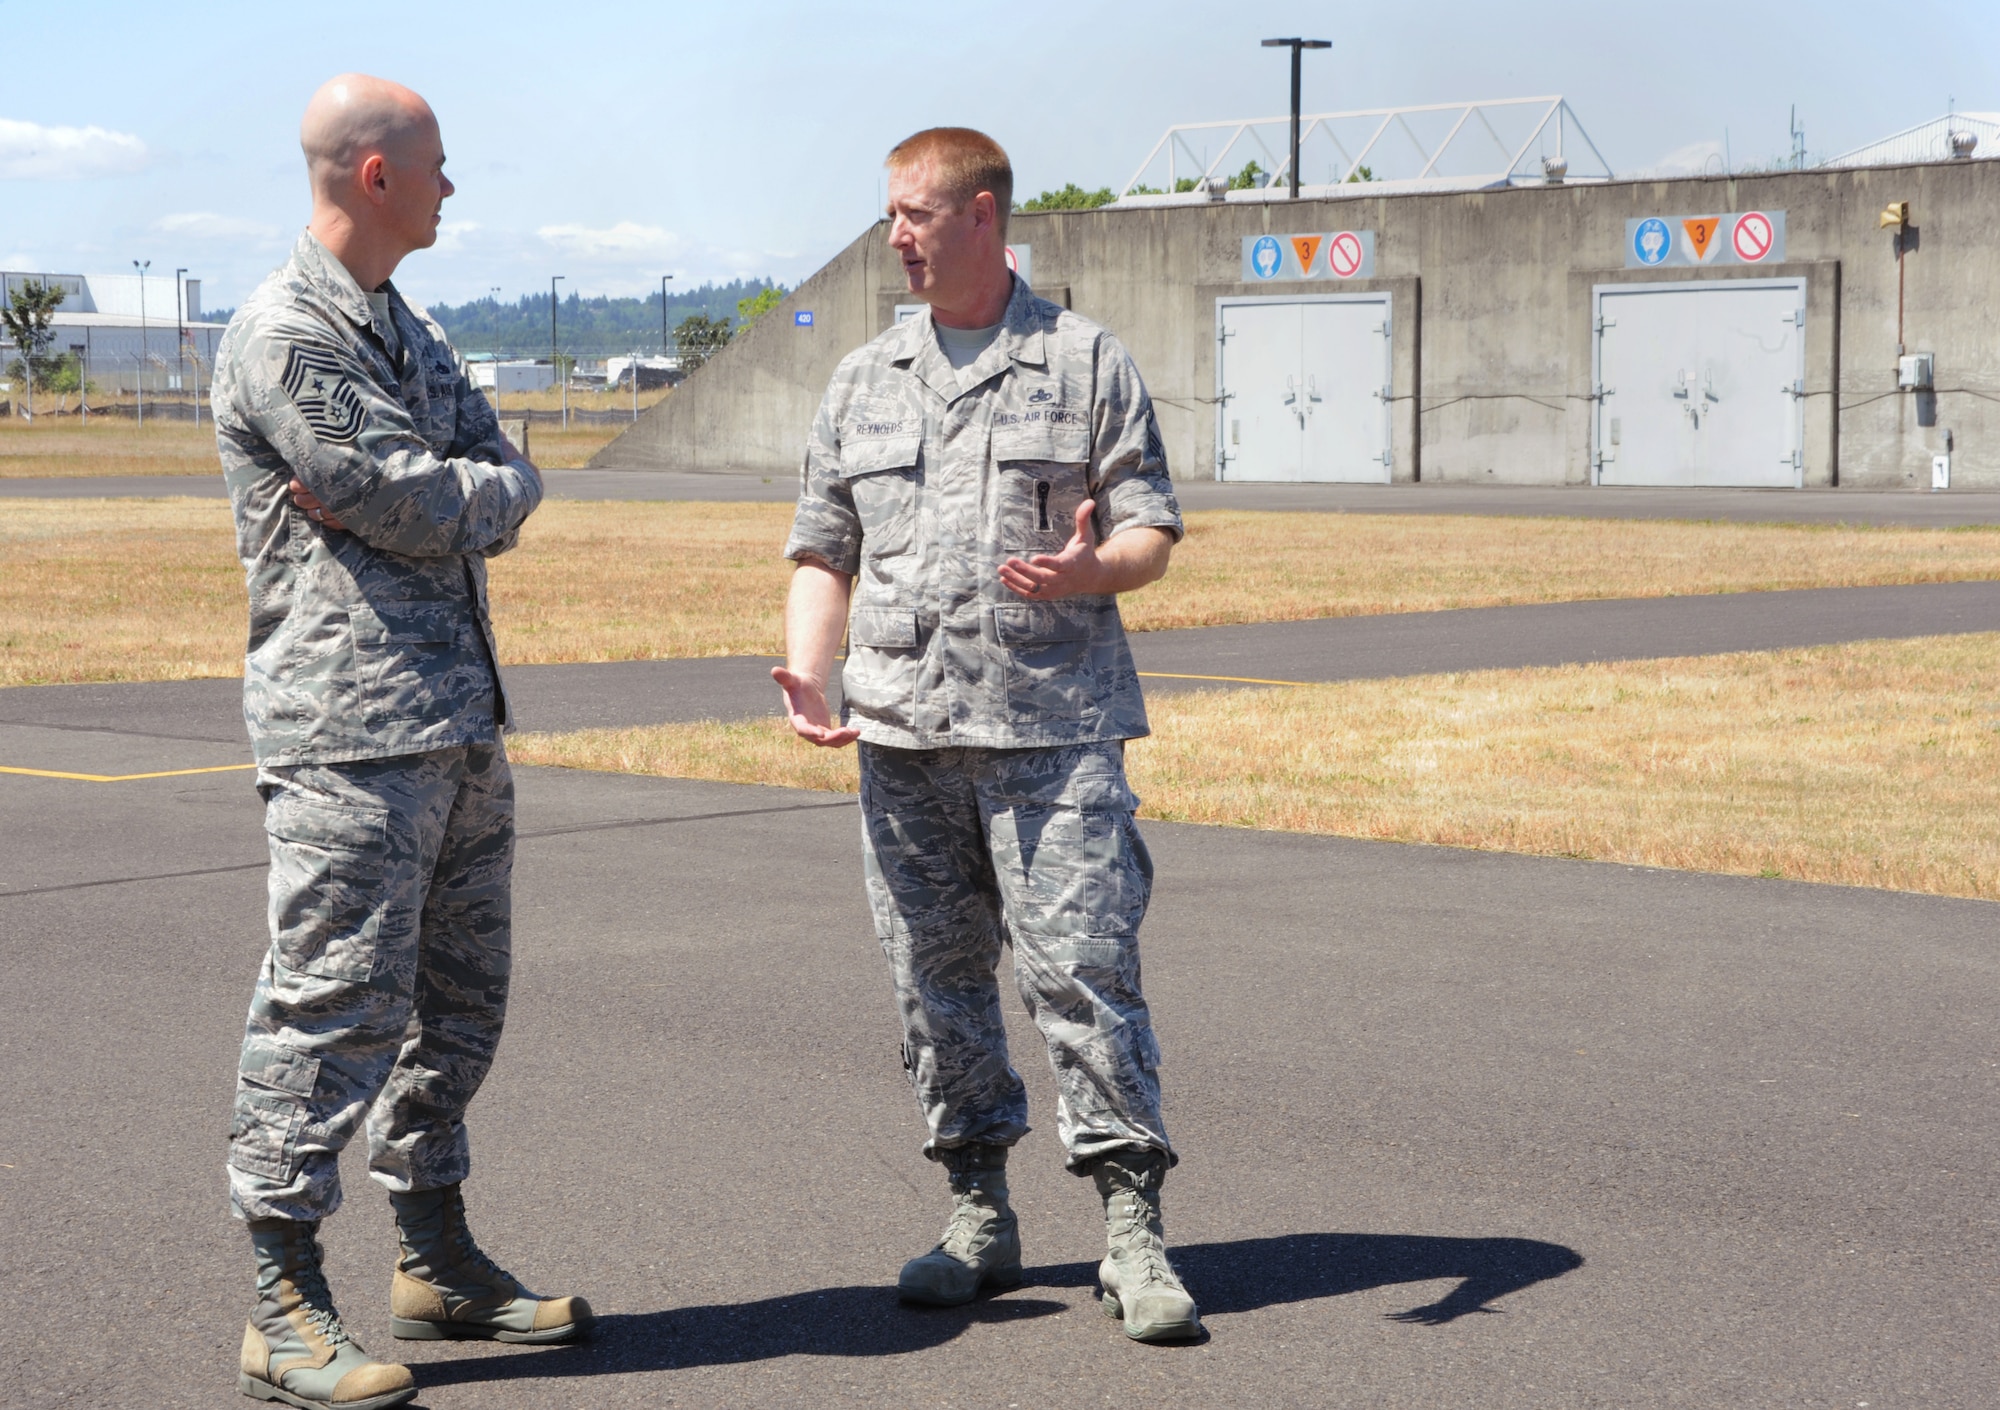 Senior Master Sgt. Jeffrey Reynolds, assigned to the 142nd Fighter Wing Maintenance Group, right, takes Ronald C. Anderson Jr., Command Chief Master Sgt., 1st Air Force, left, on a tour of the munitions area at the Portland Air National Guard Base, Ore., June 10, 2014. (Air National Guard photo by Tech. Sgt. John Hughel, 142nd Fighter Wing Public Affairs/Released)